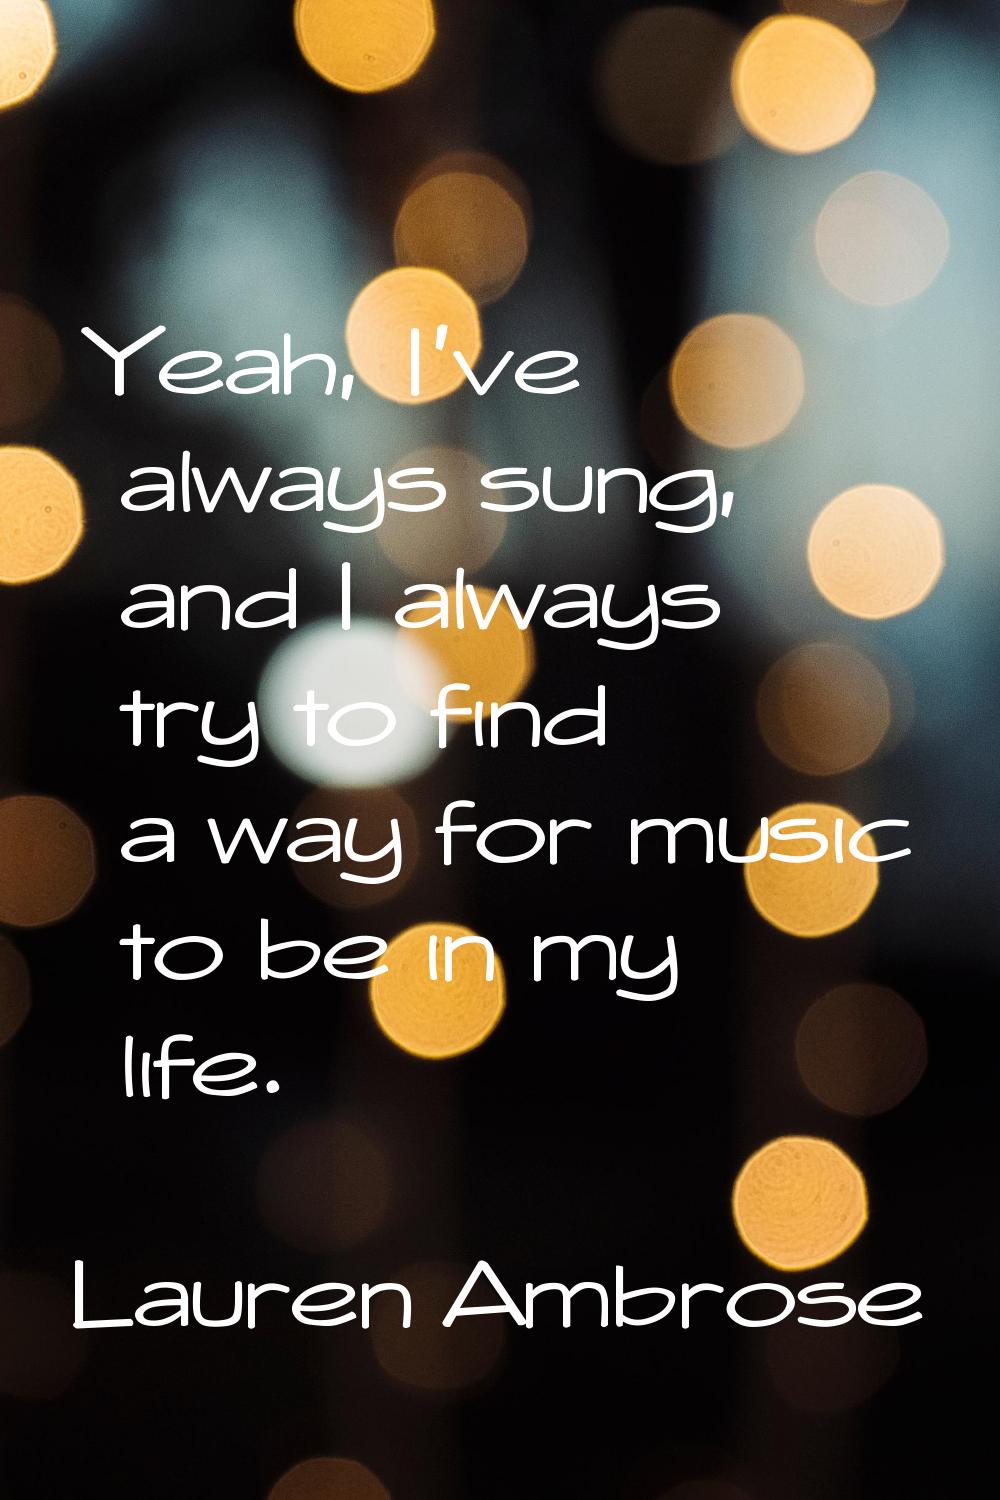 Yeah, I've always sung, and I always try to find a way for music to be in my life.